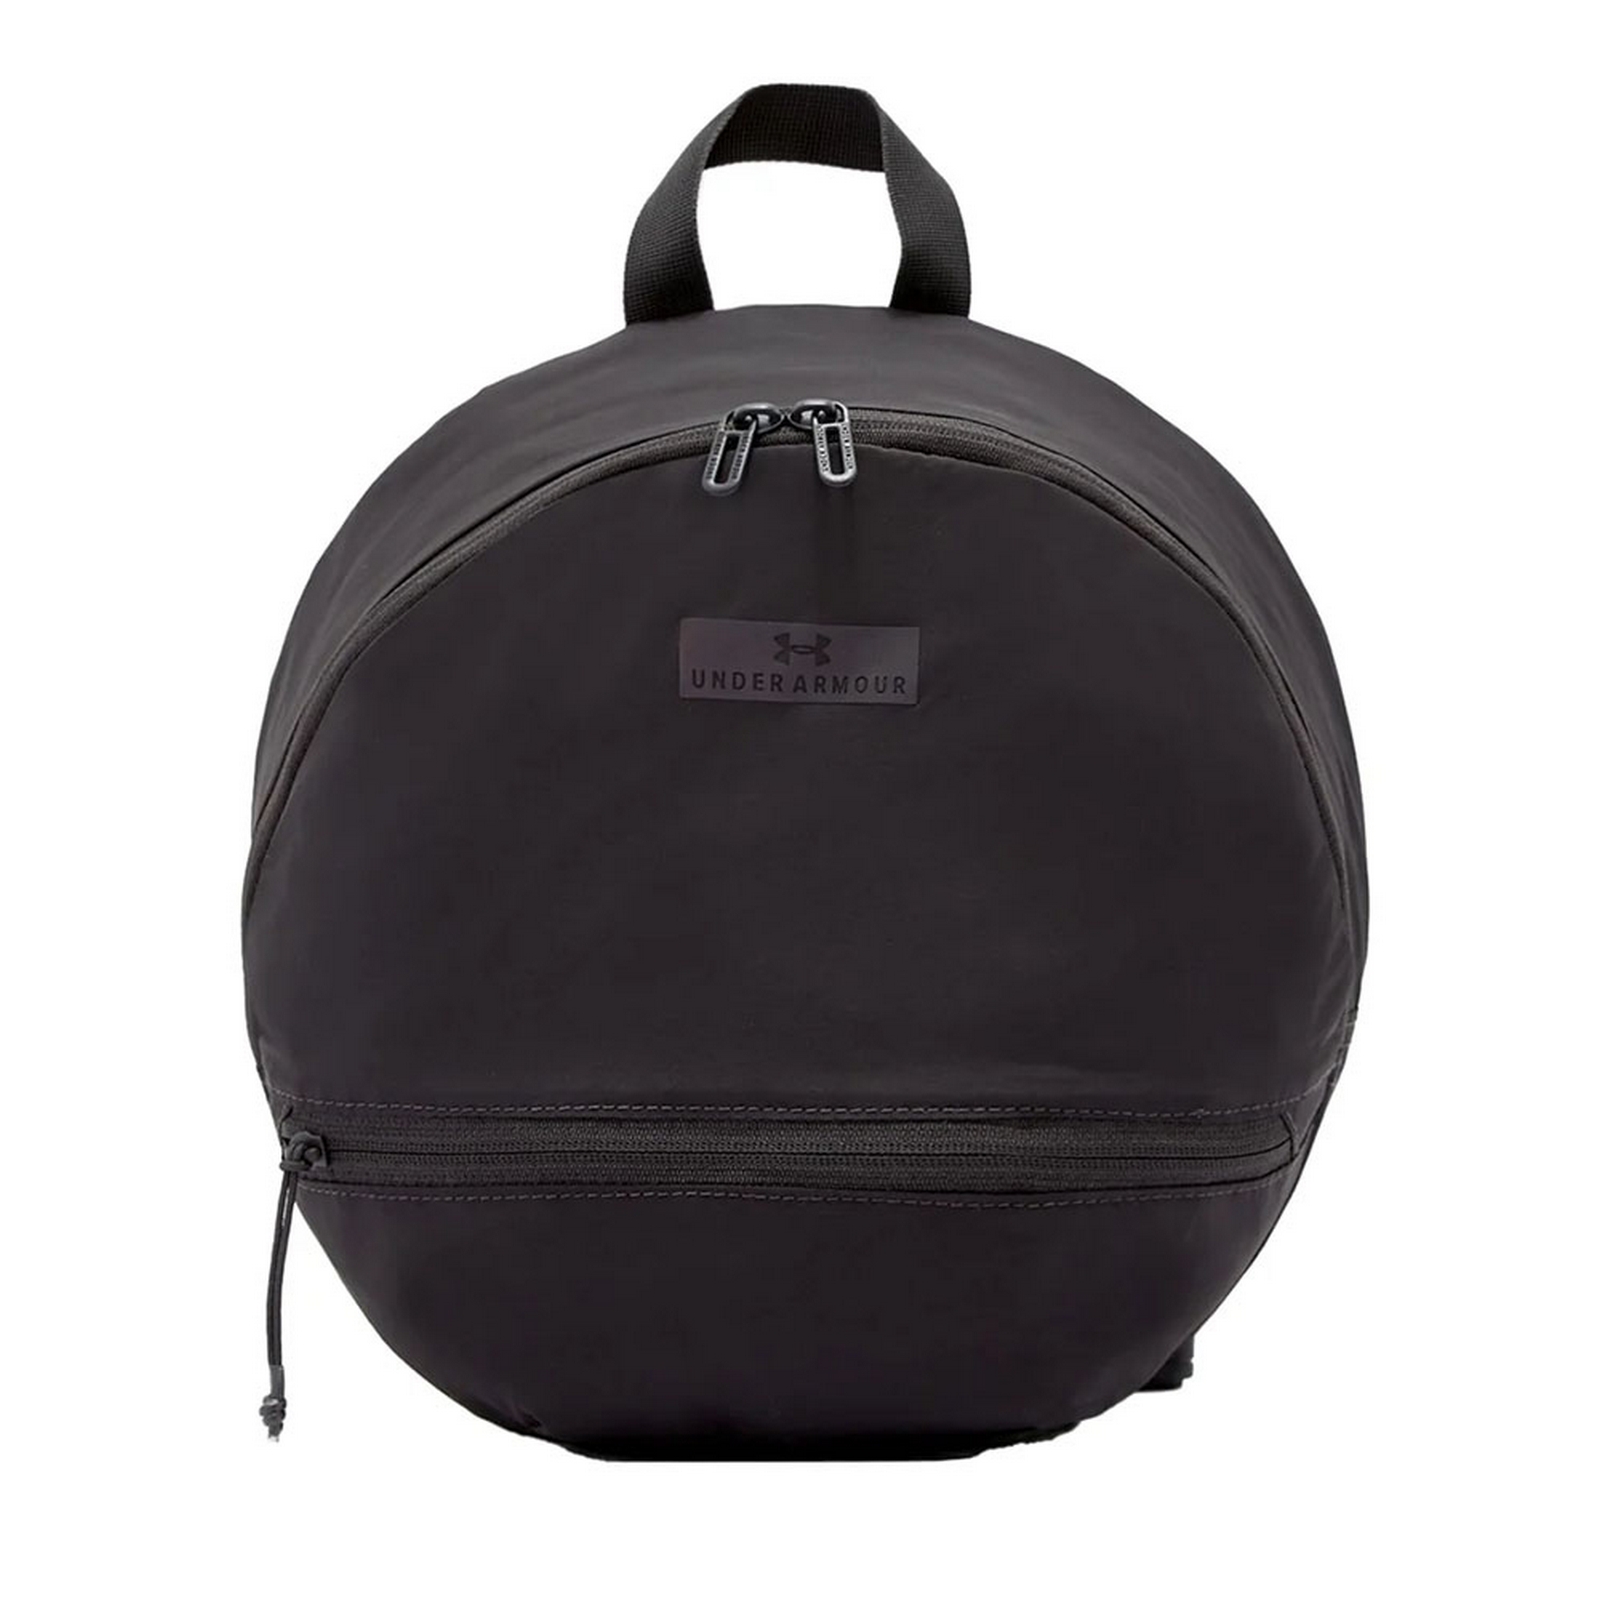   Midi Backpack 2.0,  Under Armour 1352128-010 